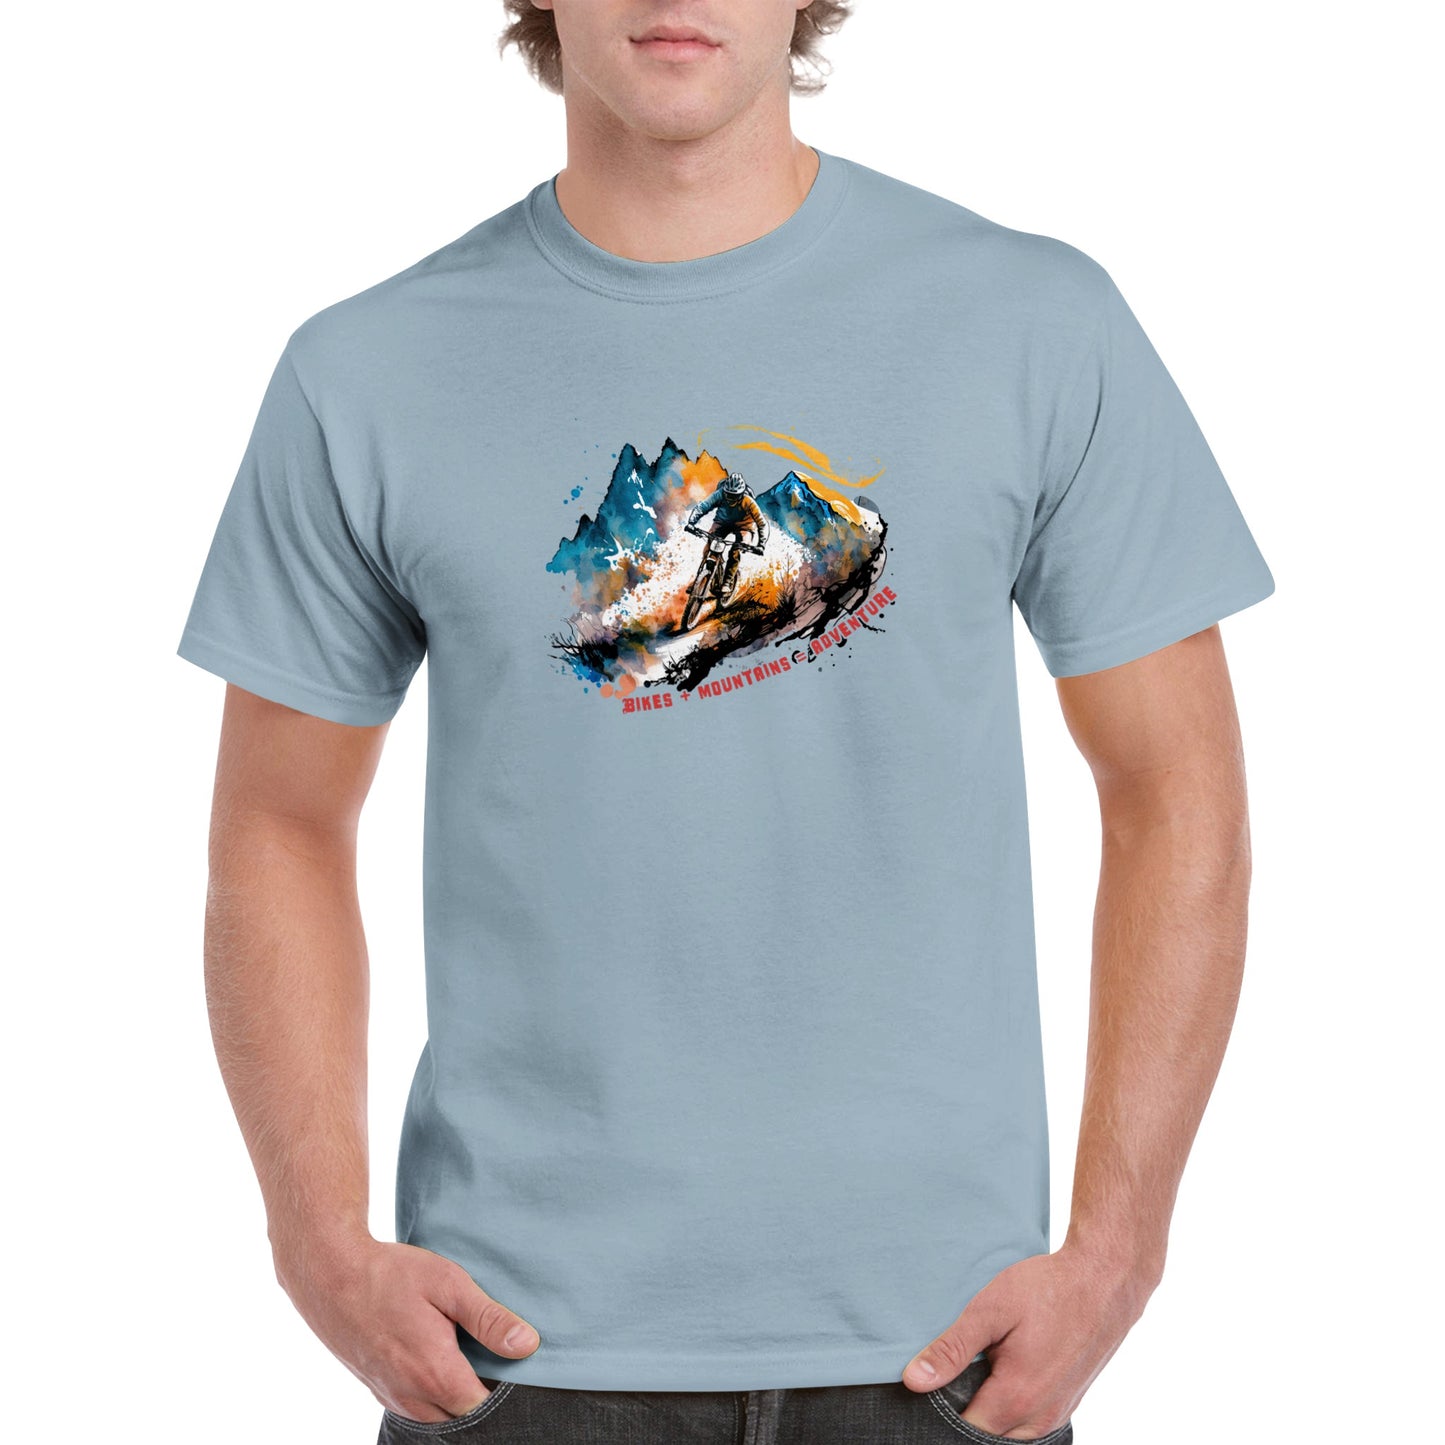 guy wearing a light blue t-shirt with a mountain bike print with the caption Bikes + Mountains = Adventure